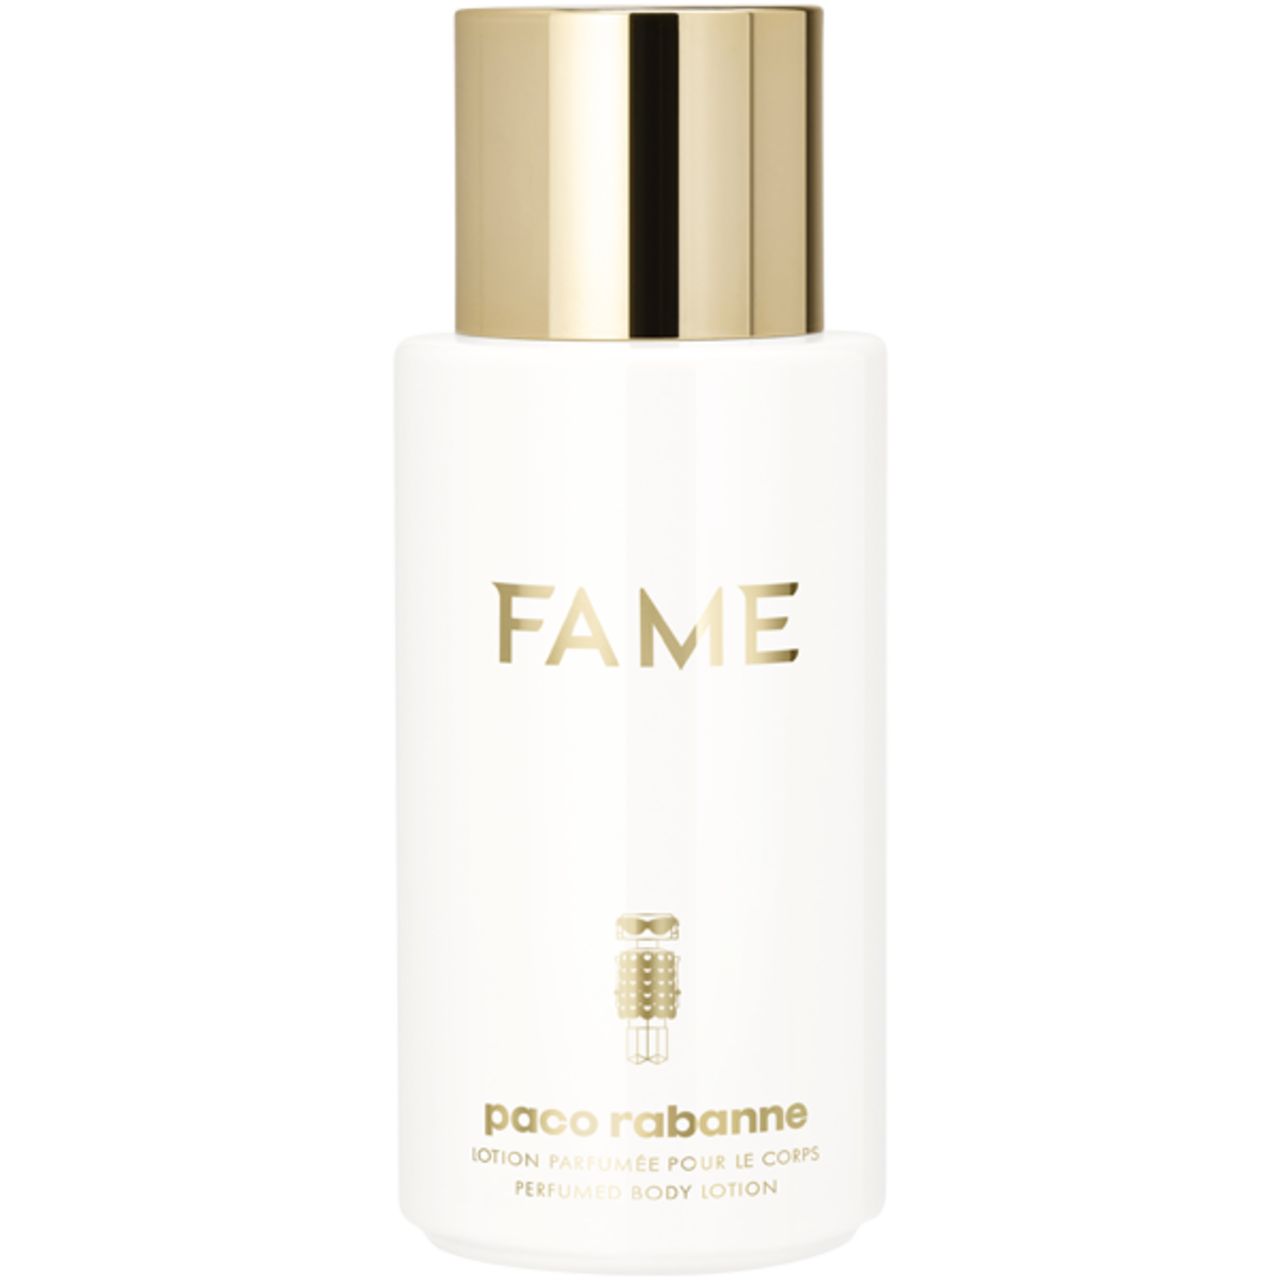 Paco Rabanne, Fame Body Lotion